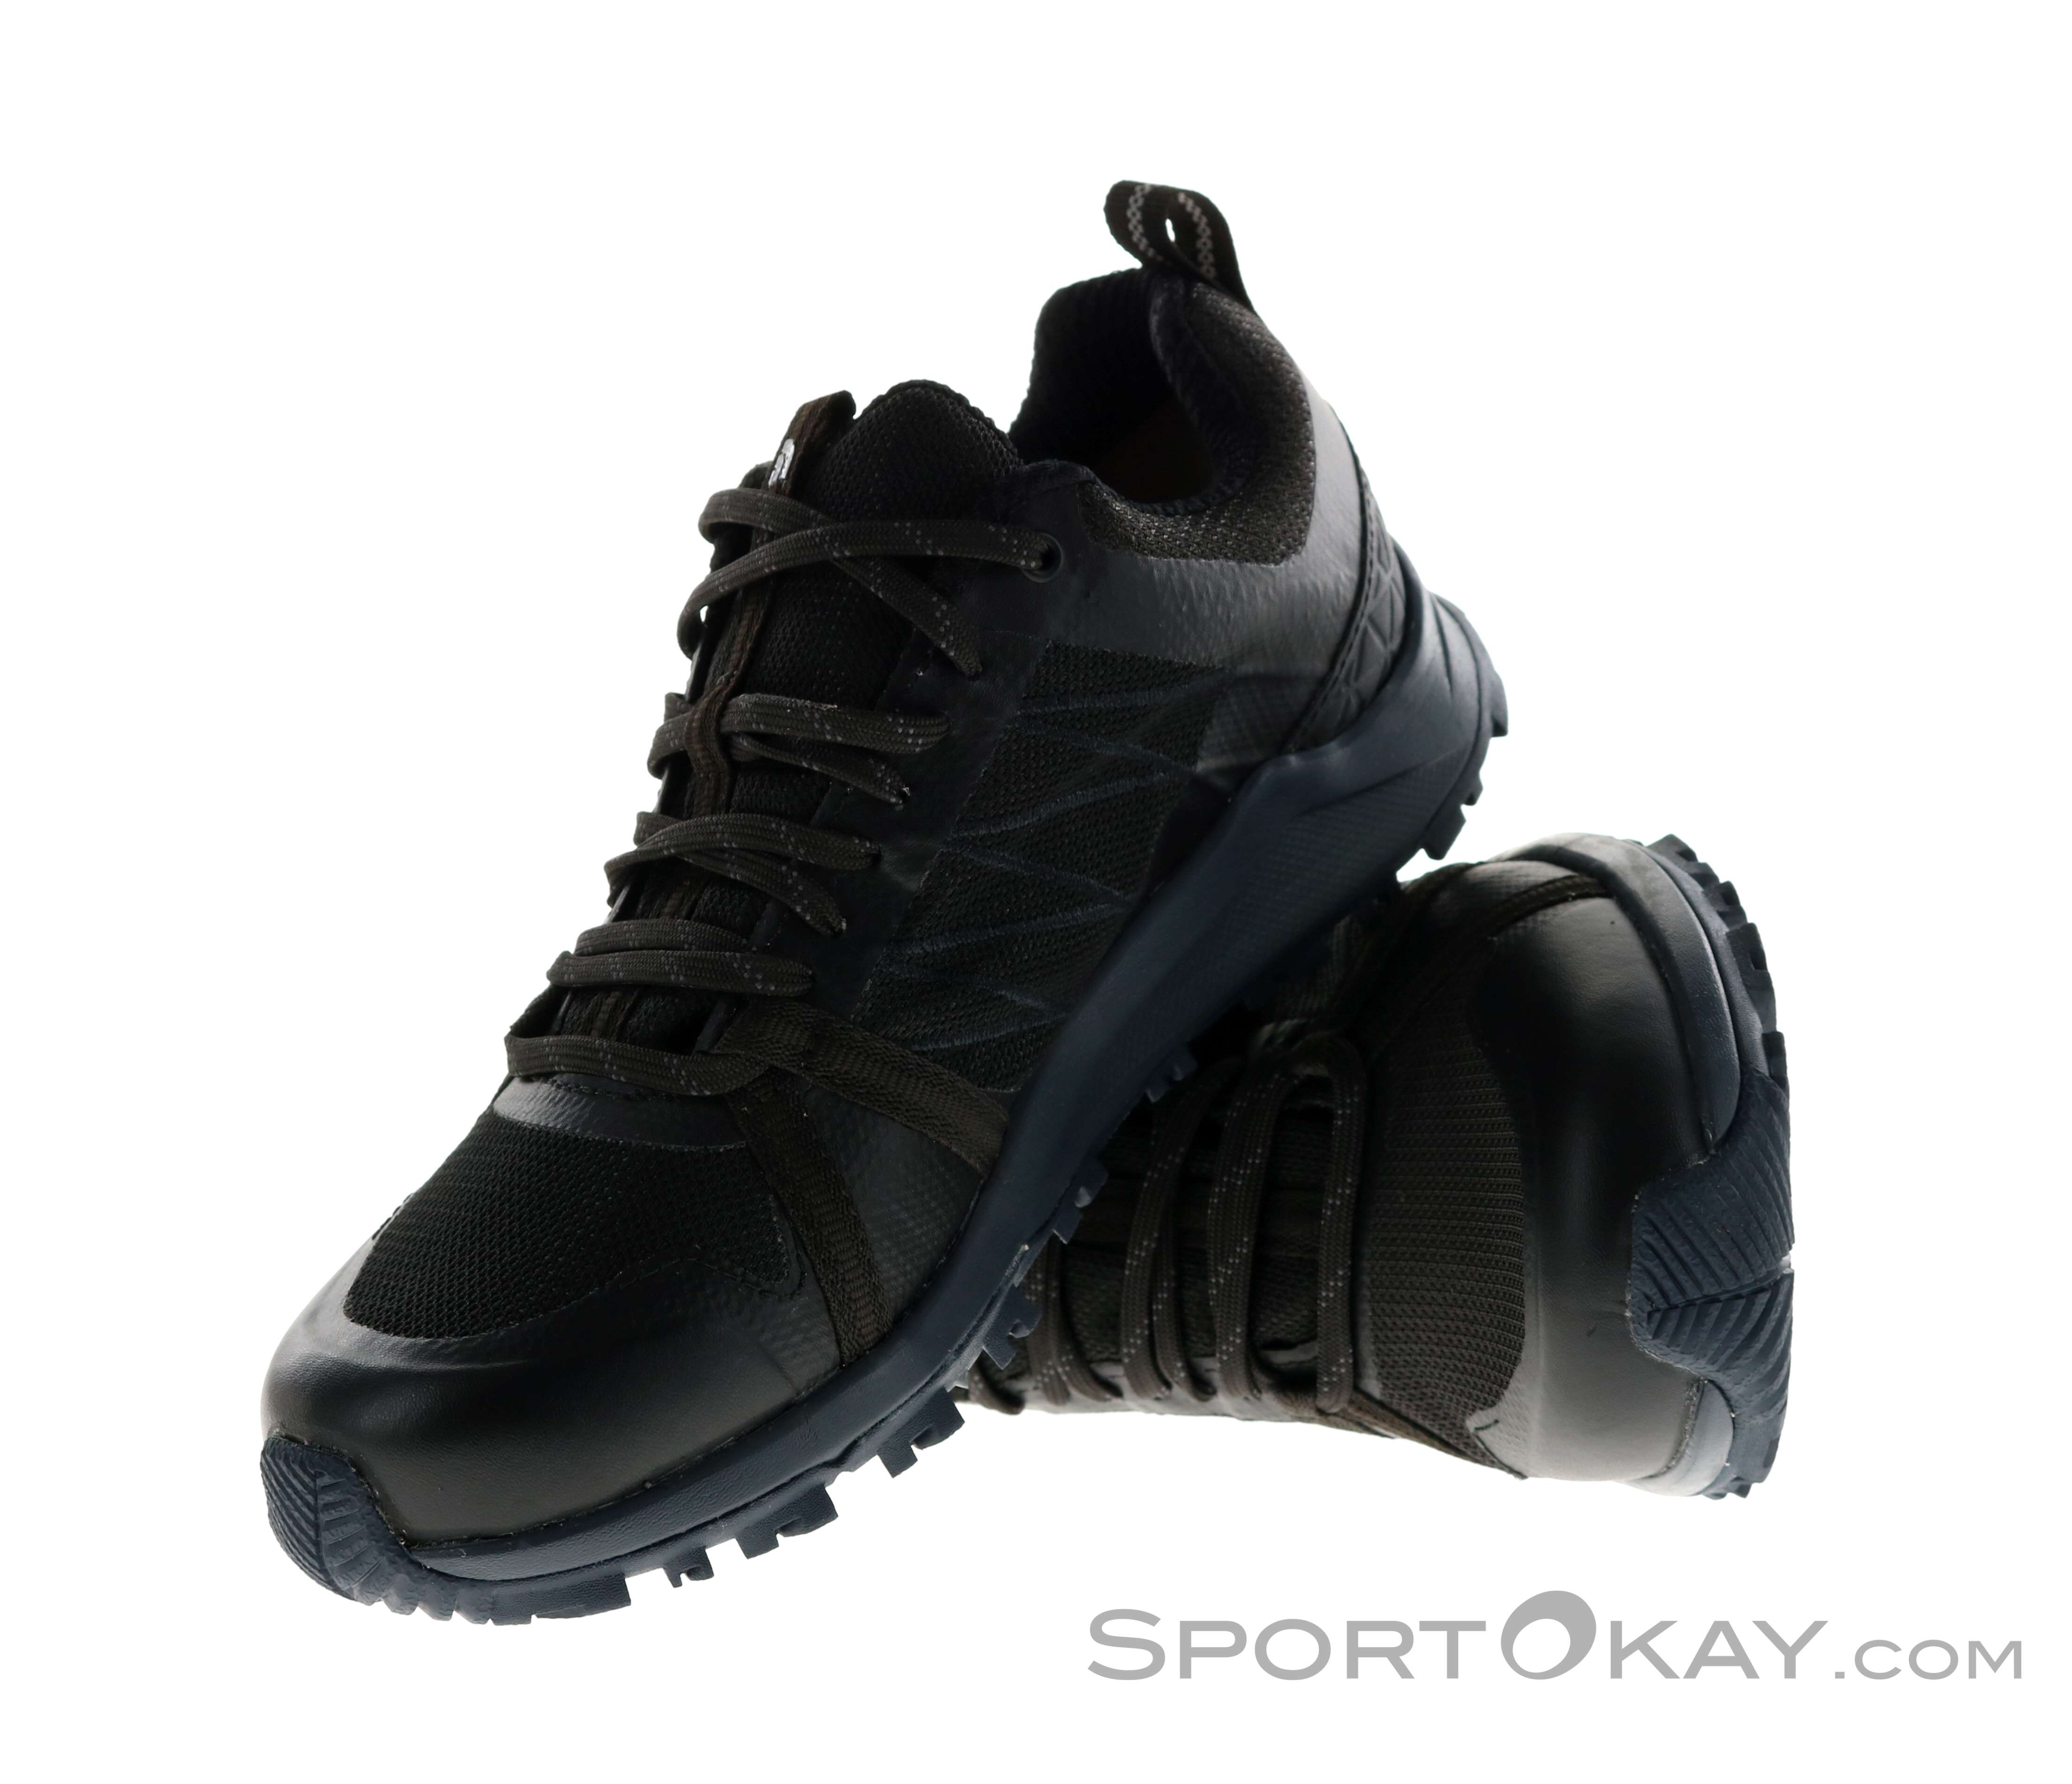 The North Face Litewave Fastpack II GTX 